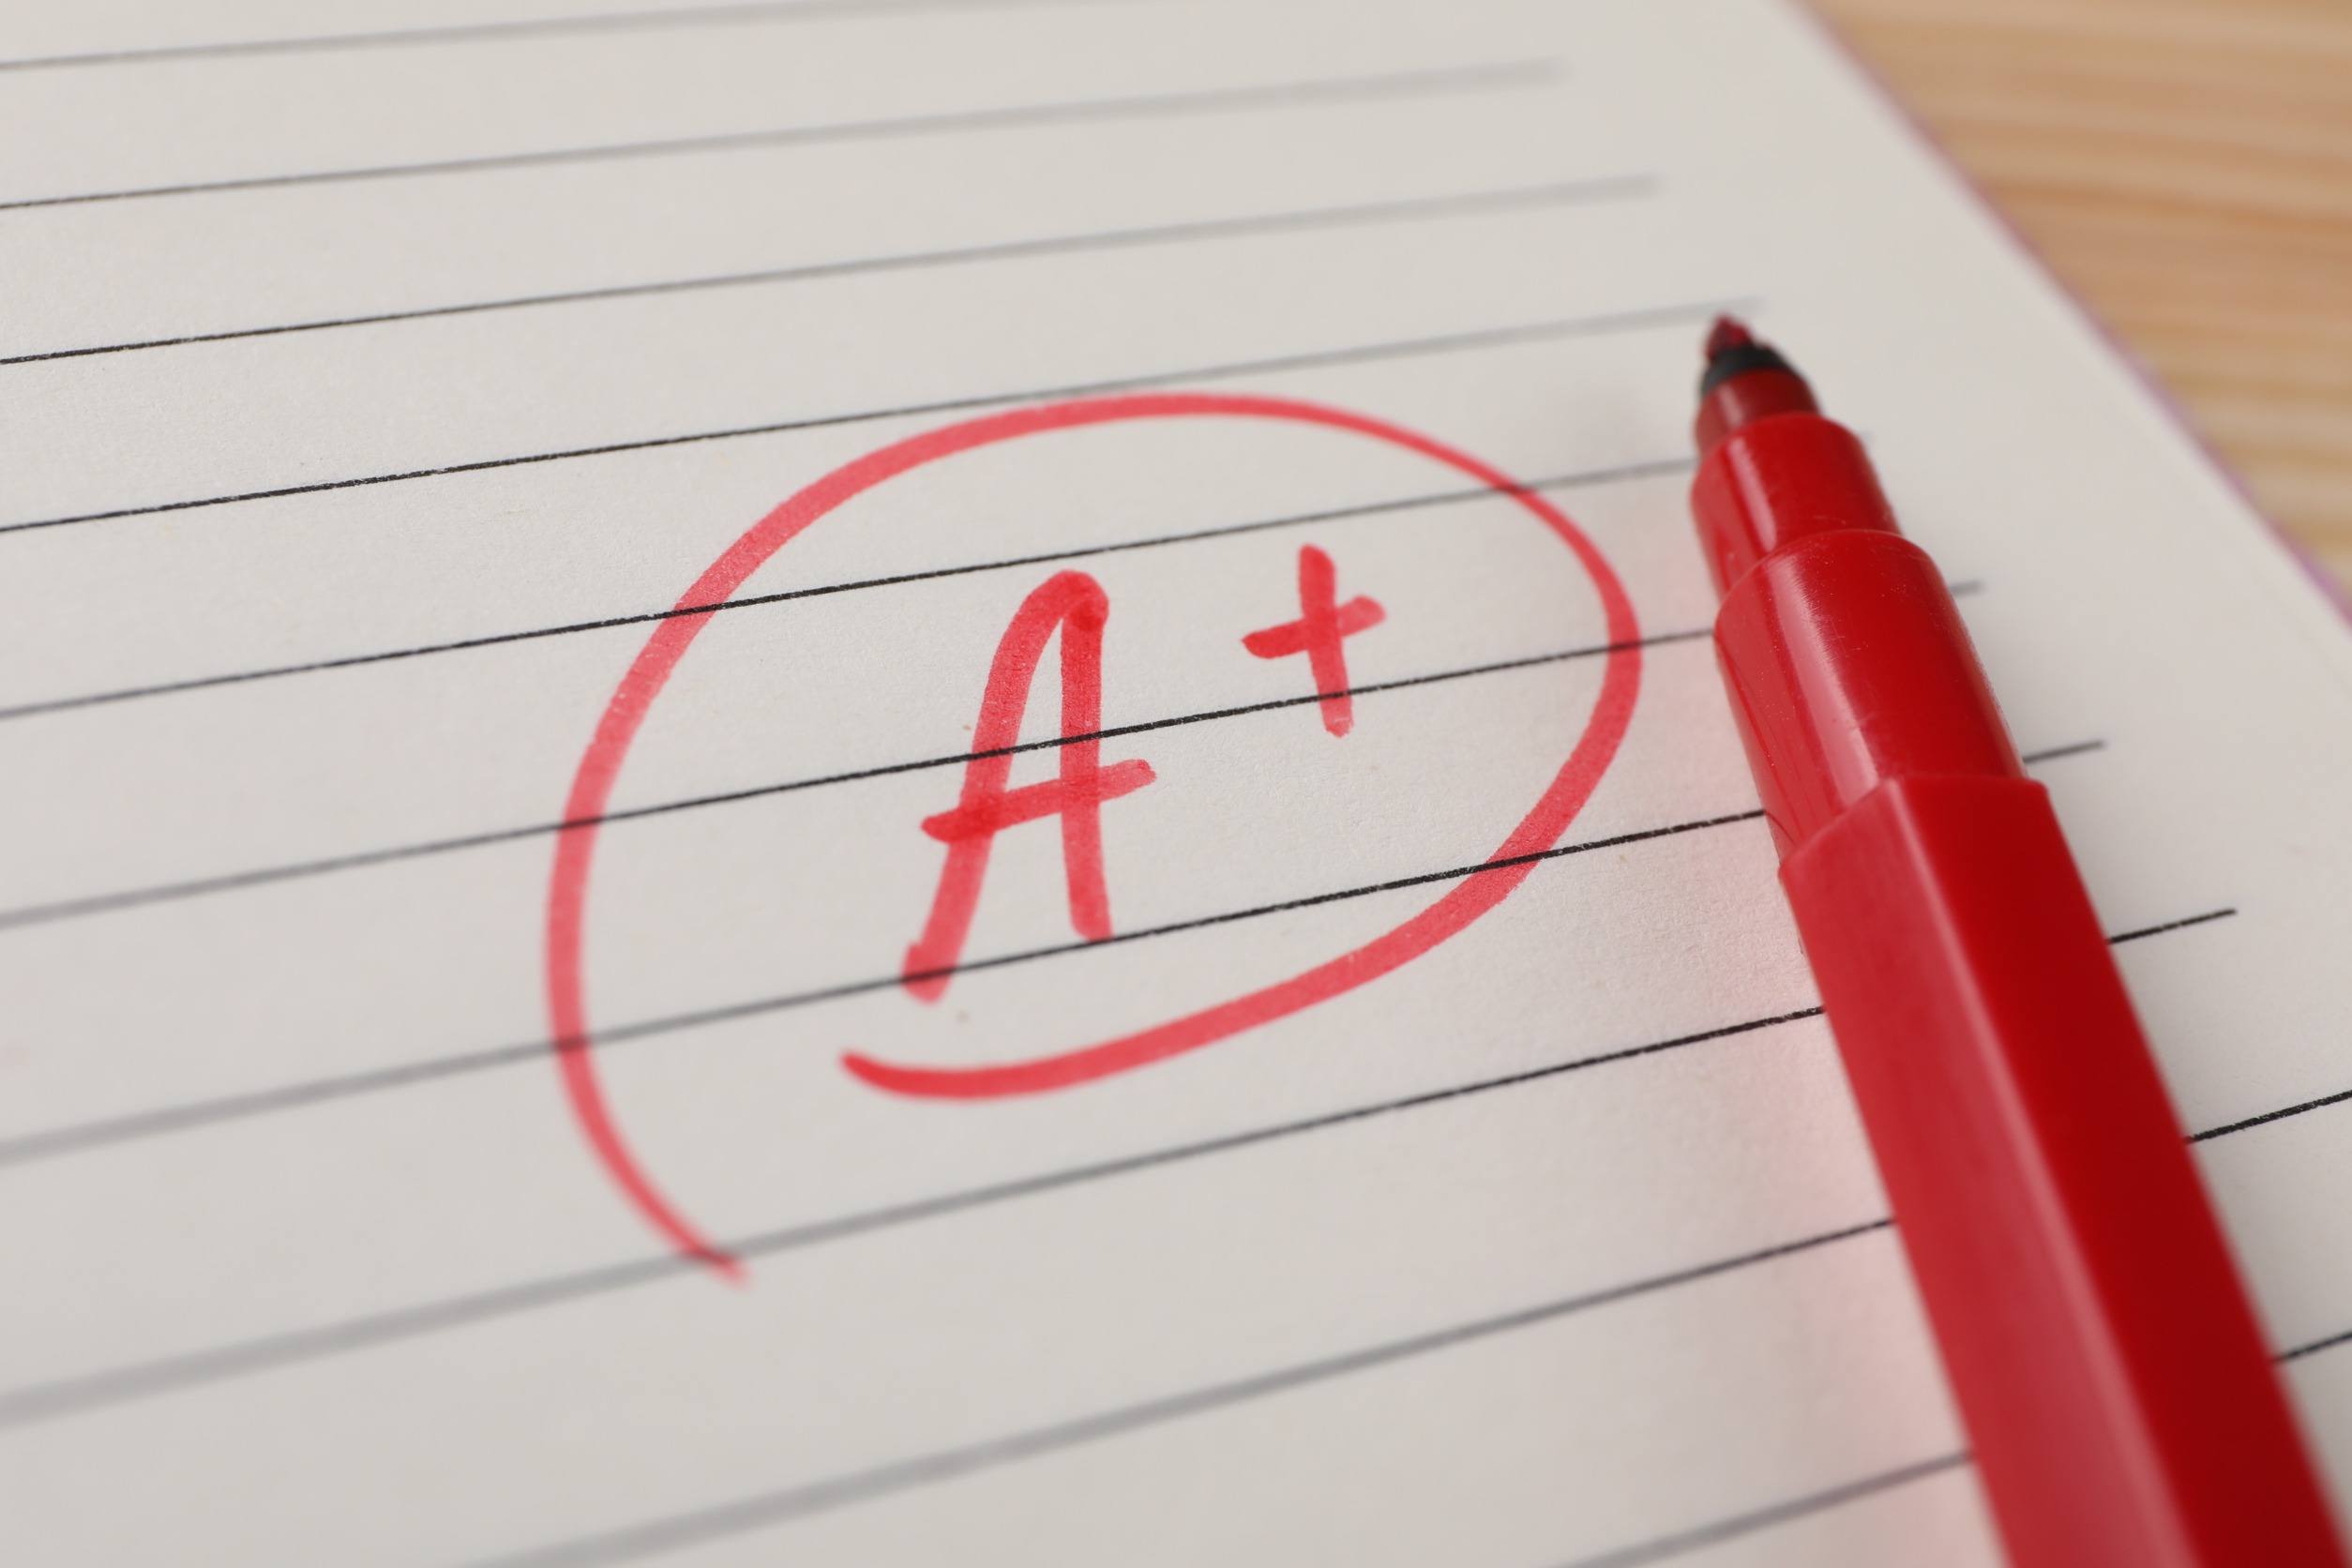 Free website report card - Red A+ written on paper